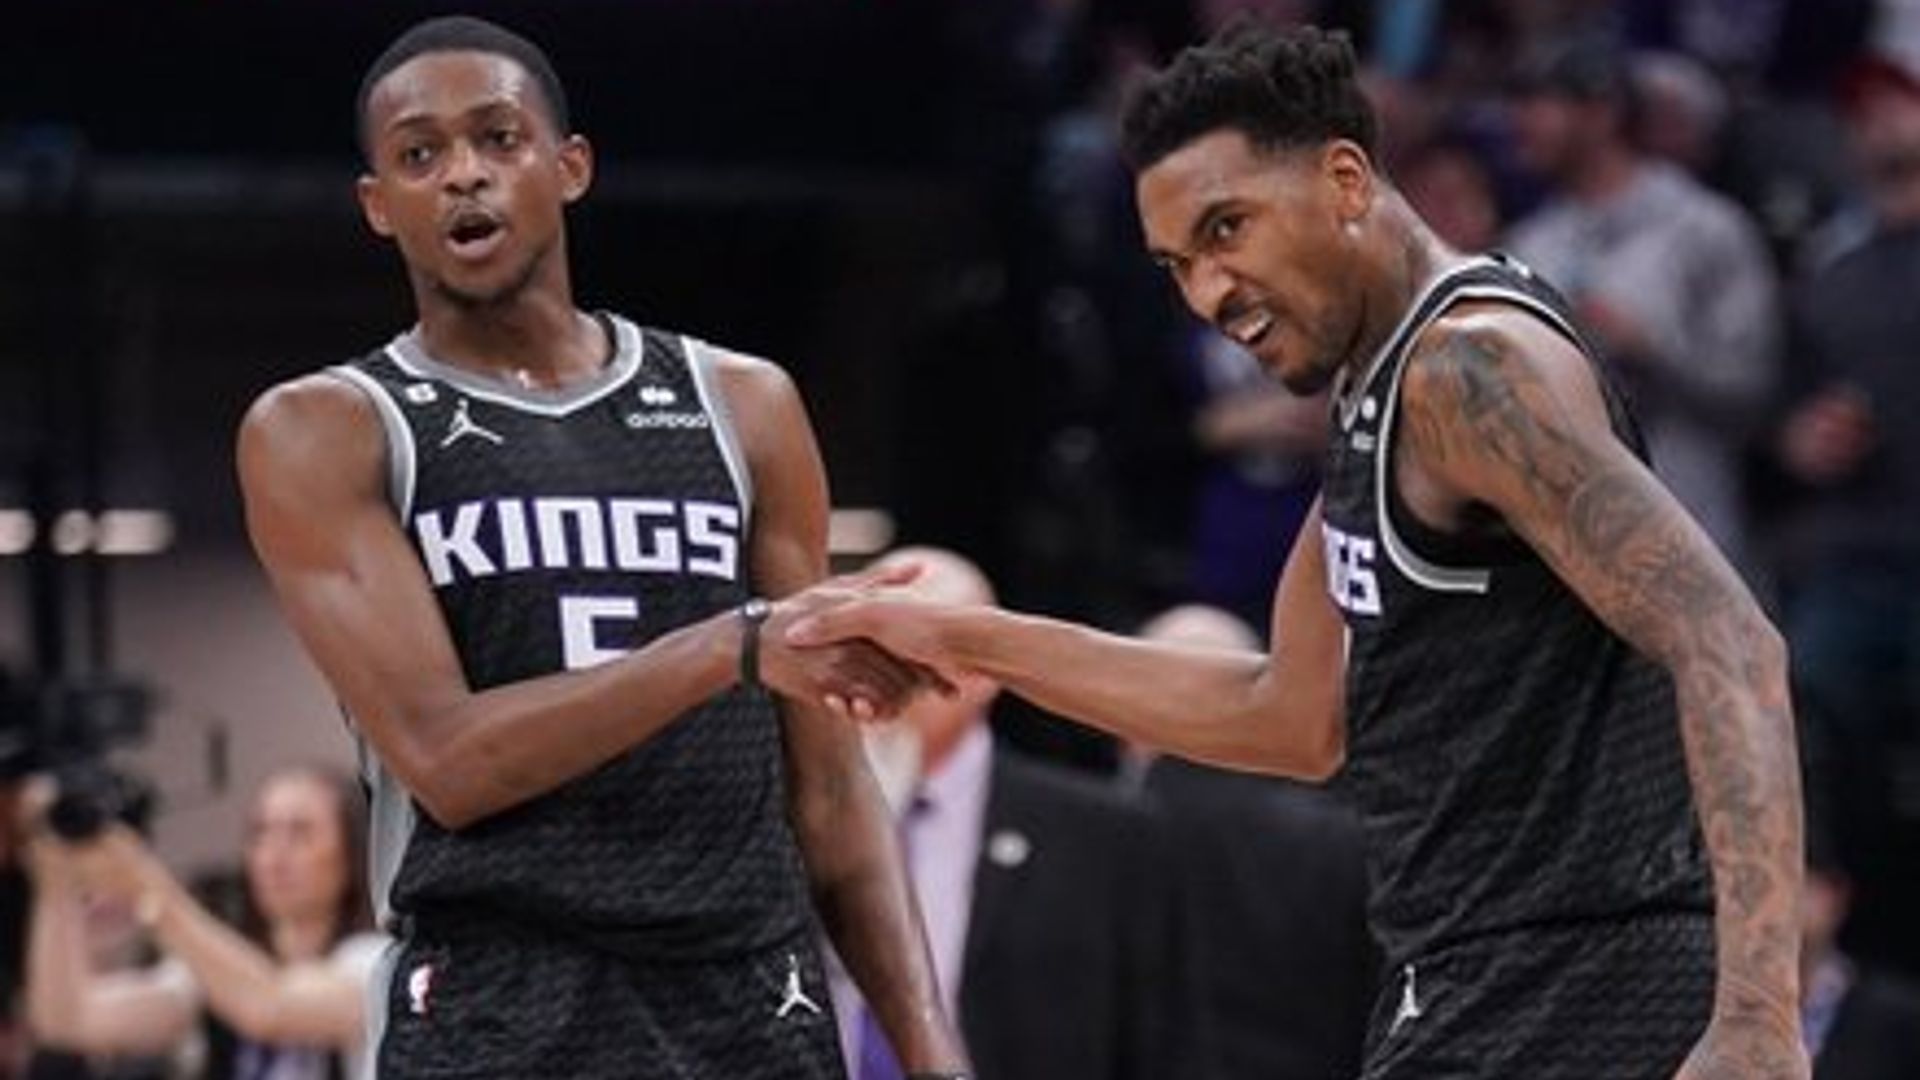 NBA round-up: Kings make history in double OT win against Clippers